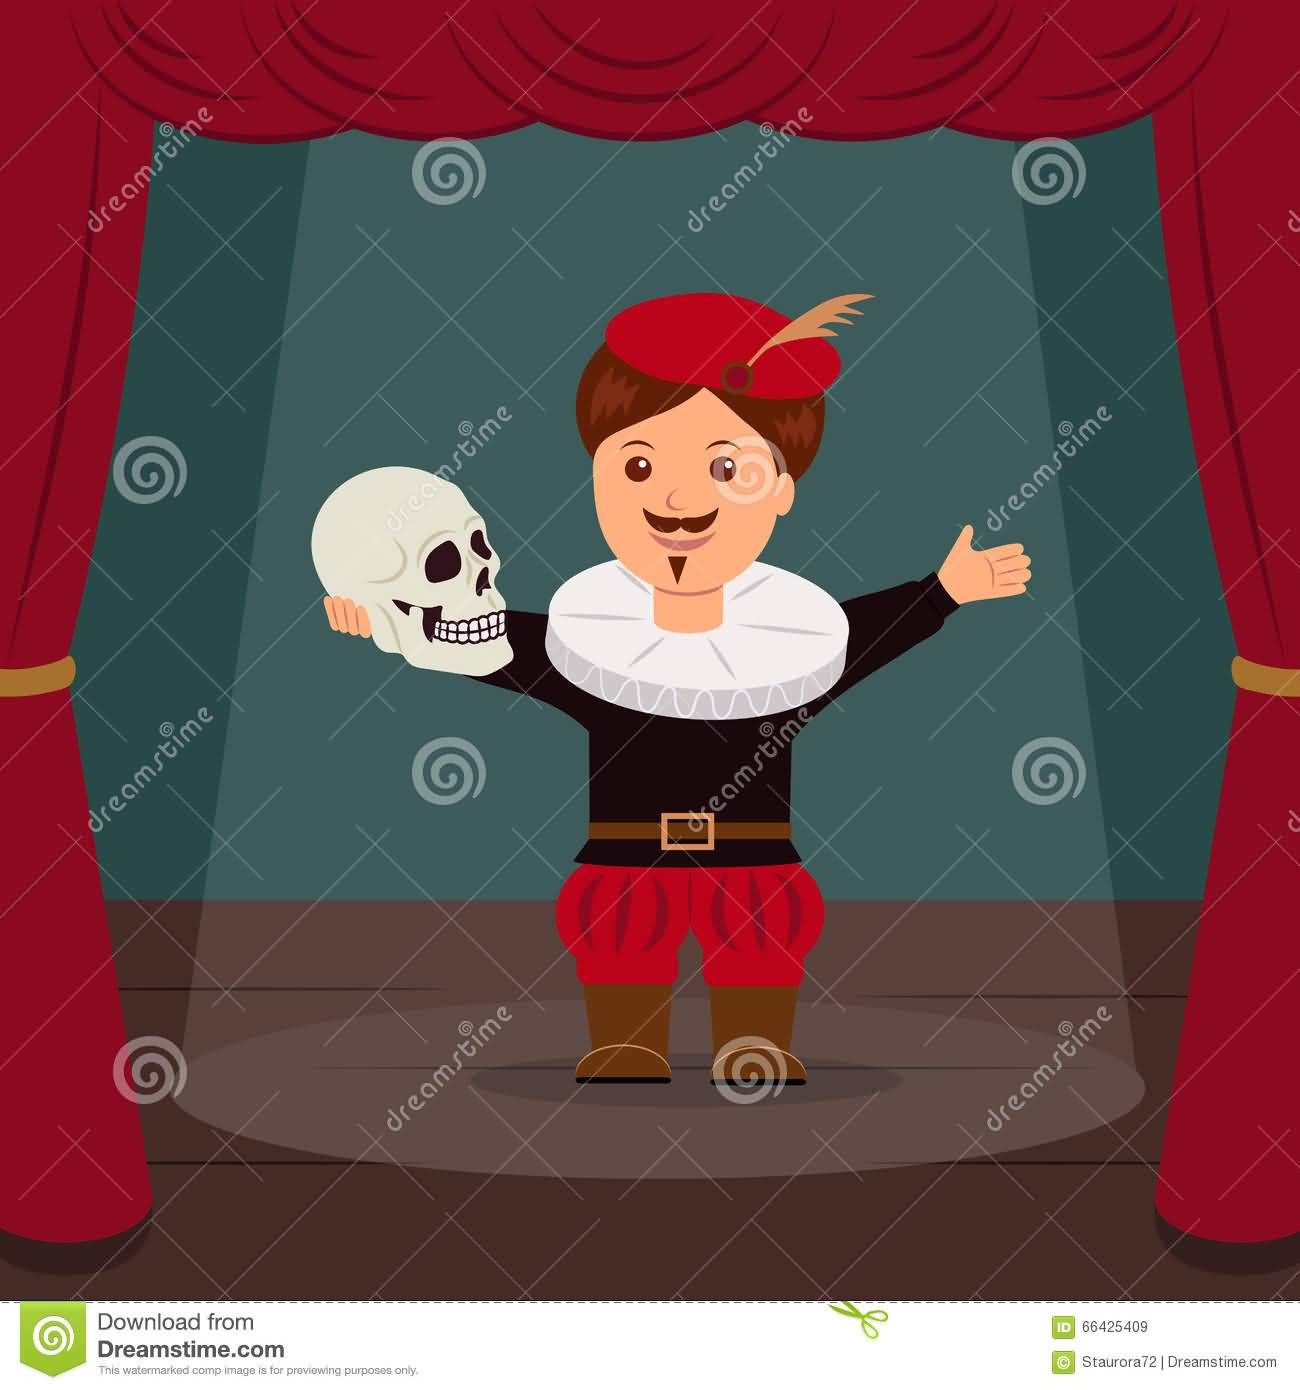 Actor On Scene Of The Theater Playing A Role Hamlet Concept World Theatre Day